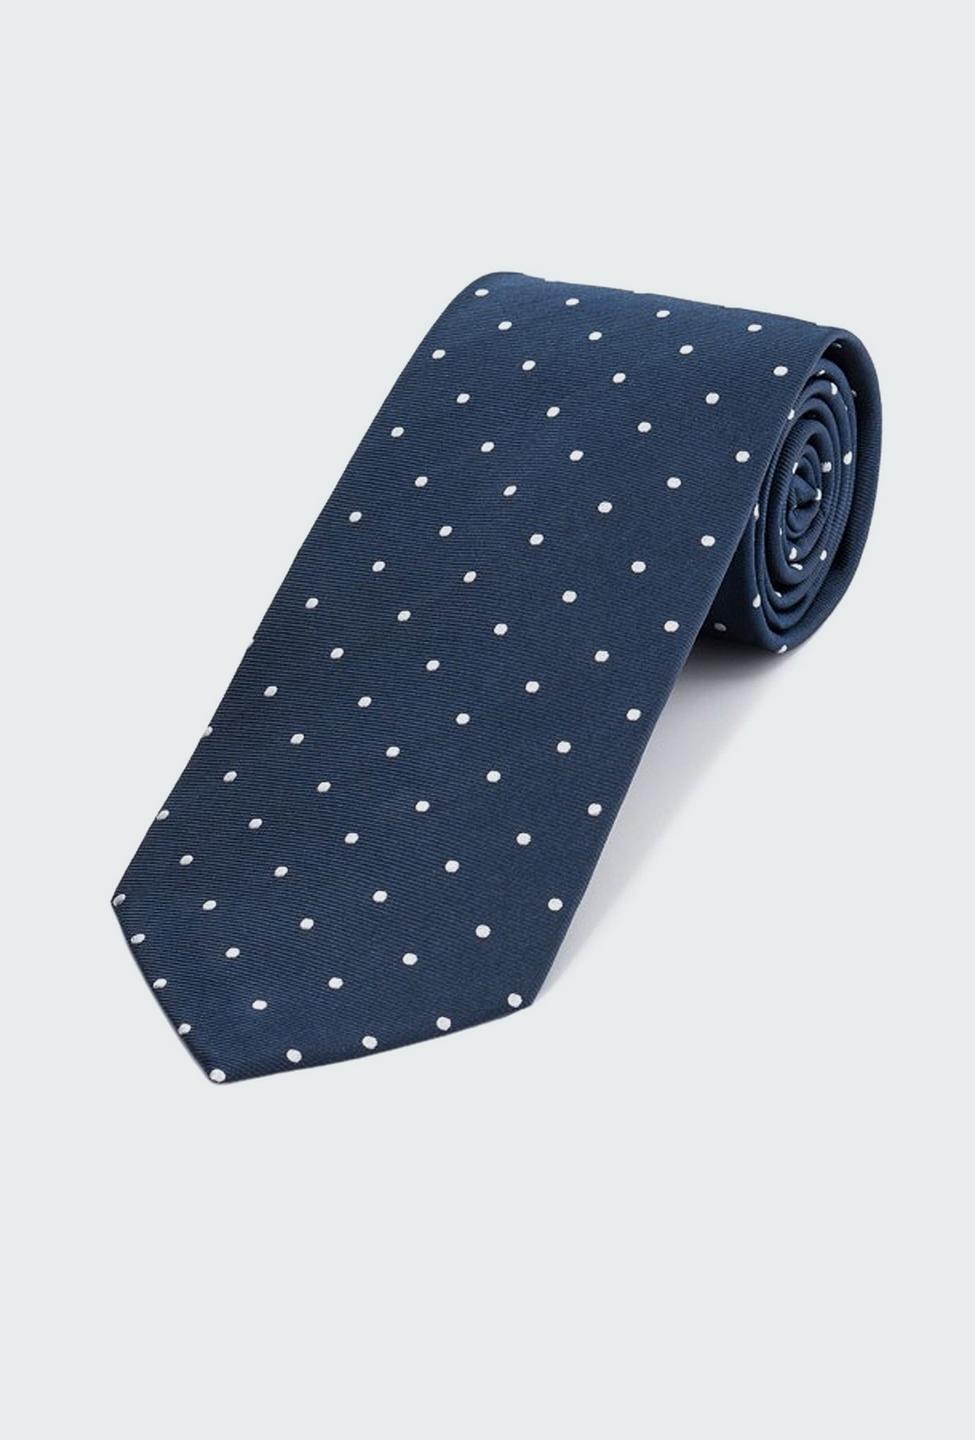 Navy tie - Pattern Design from Indochino Collection